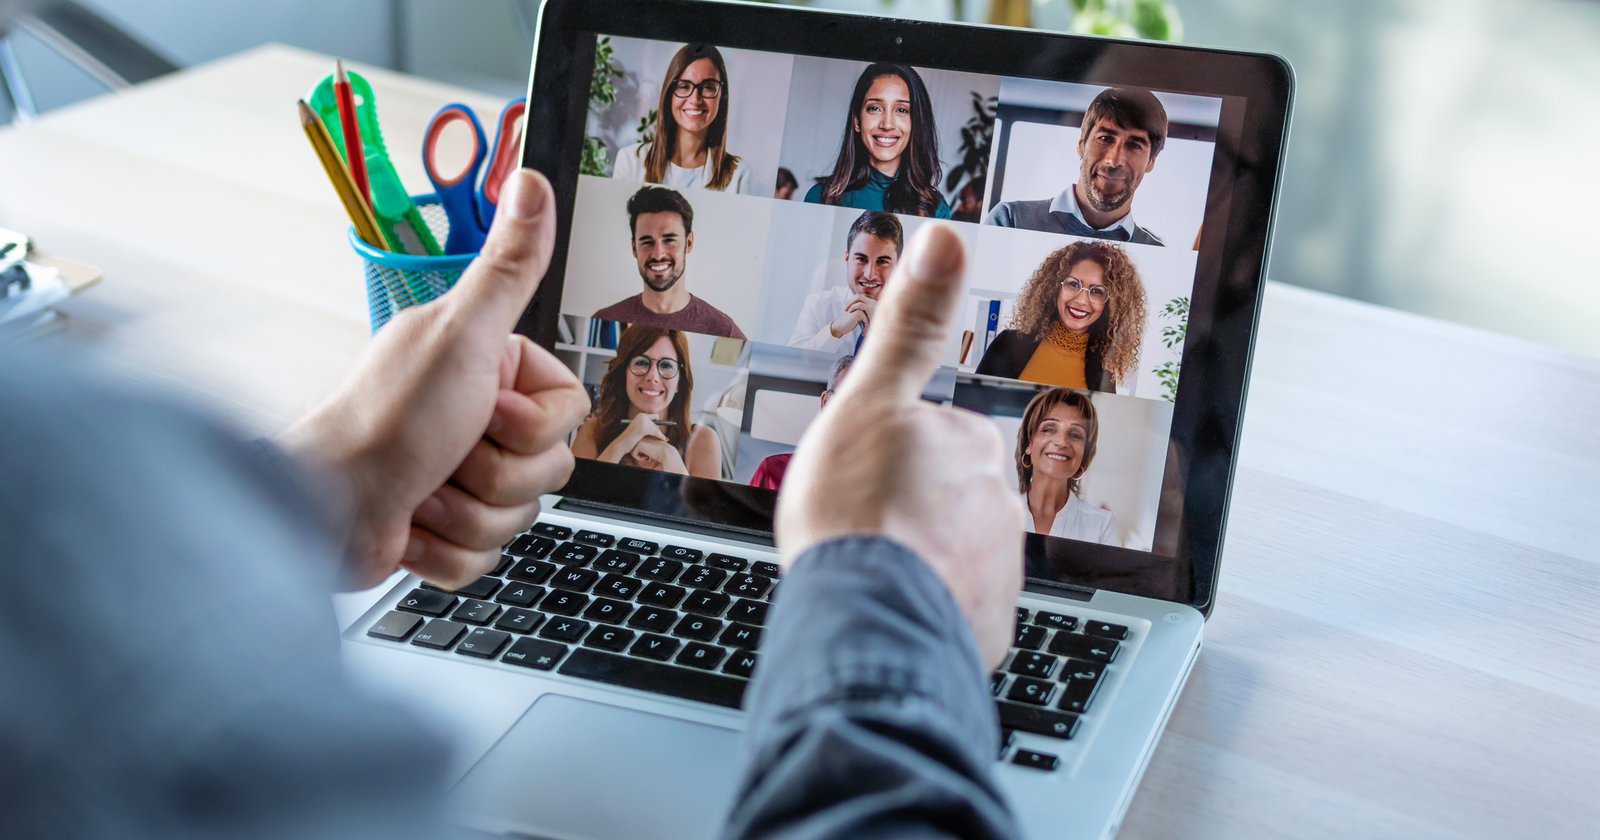 How To Build A Remote Team For SEO: Planning & Structure via @sejournal, @HelenPollitt1